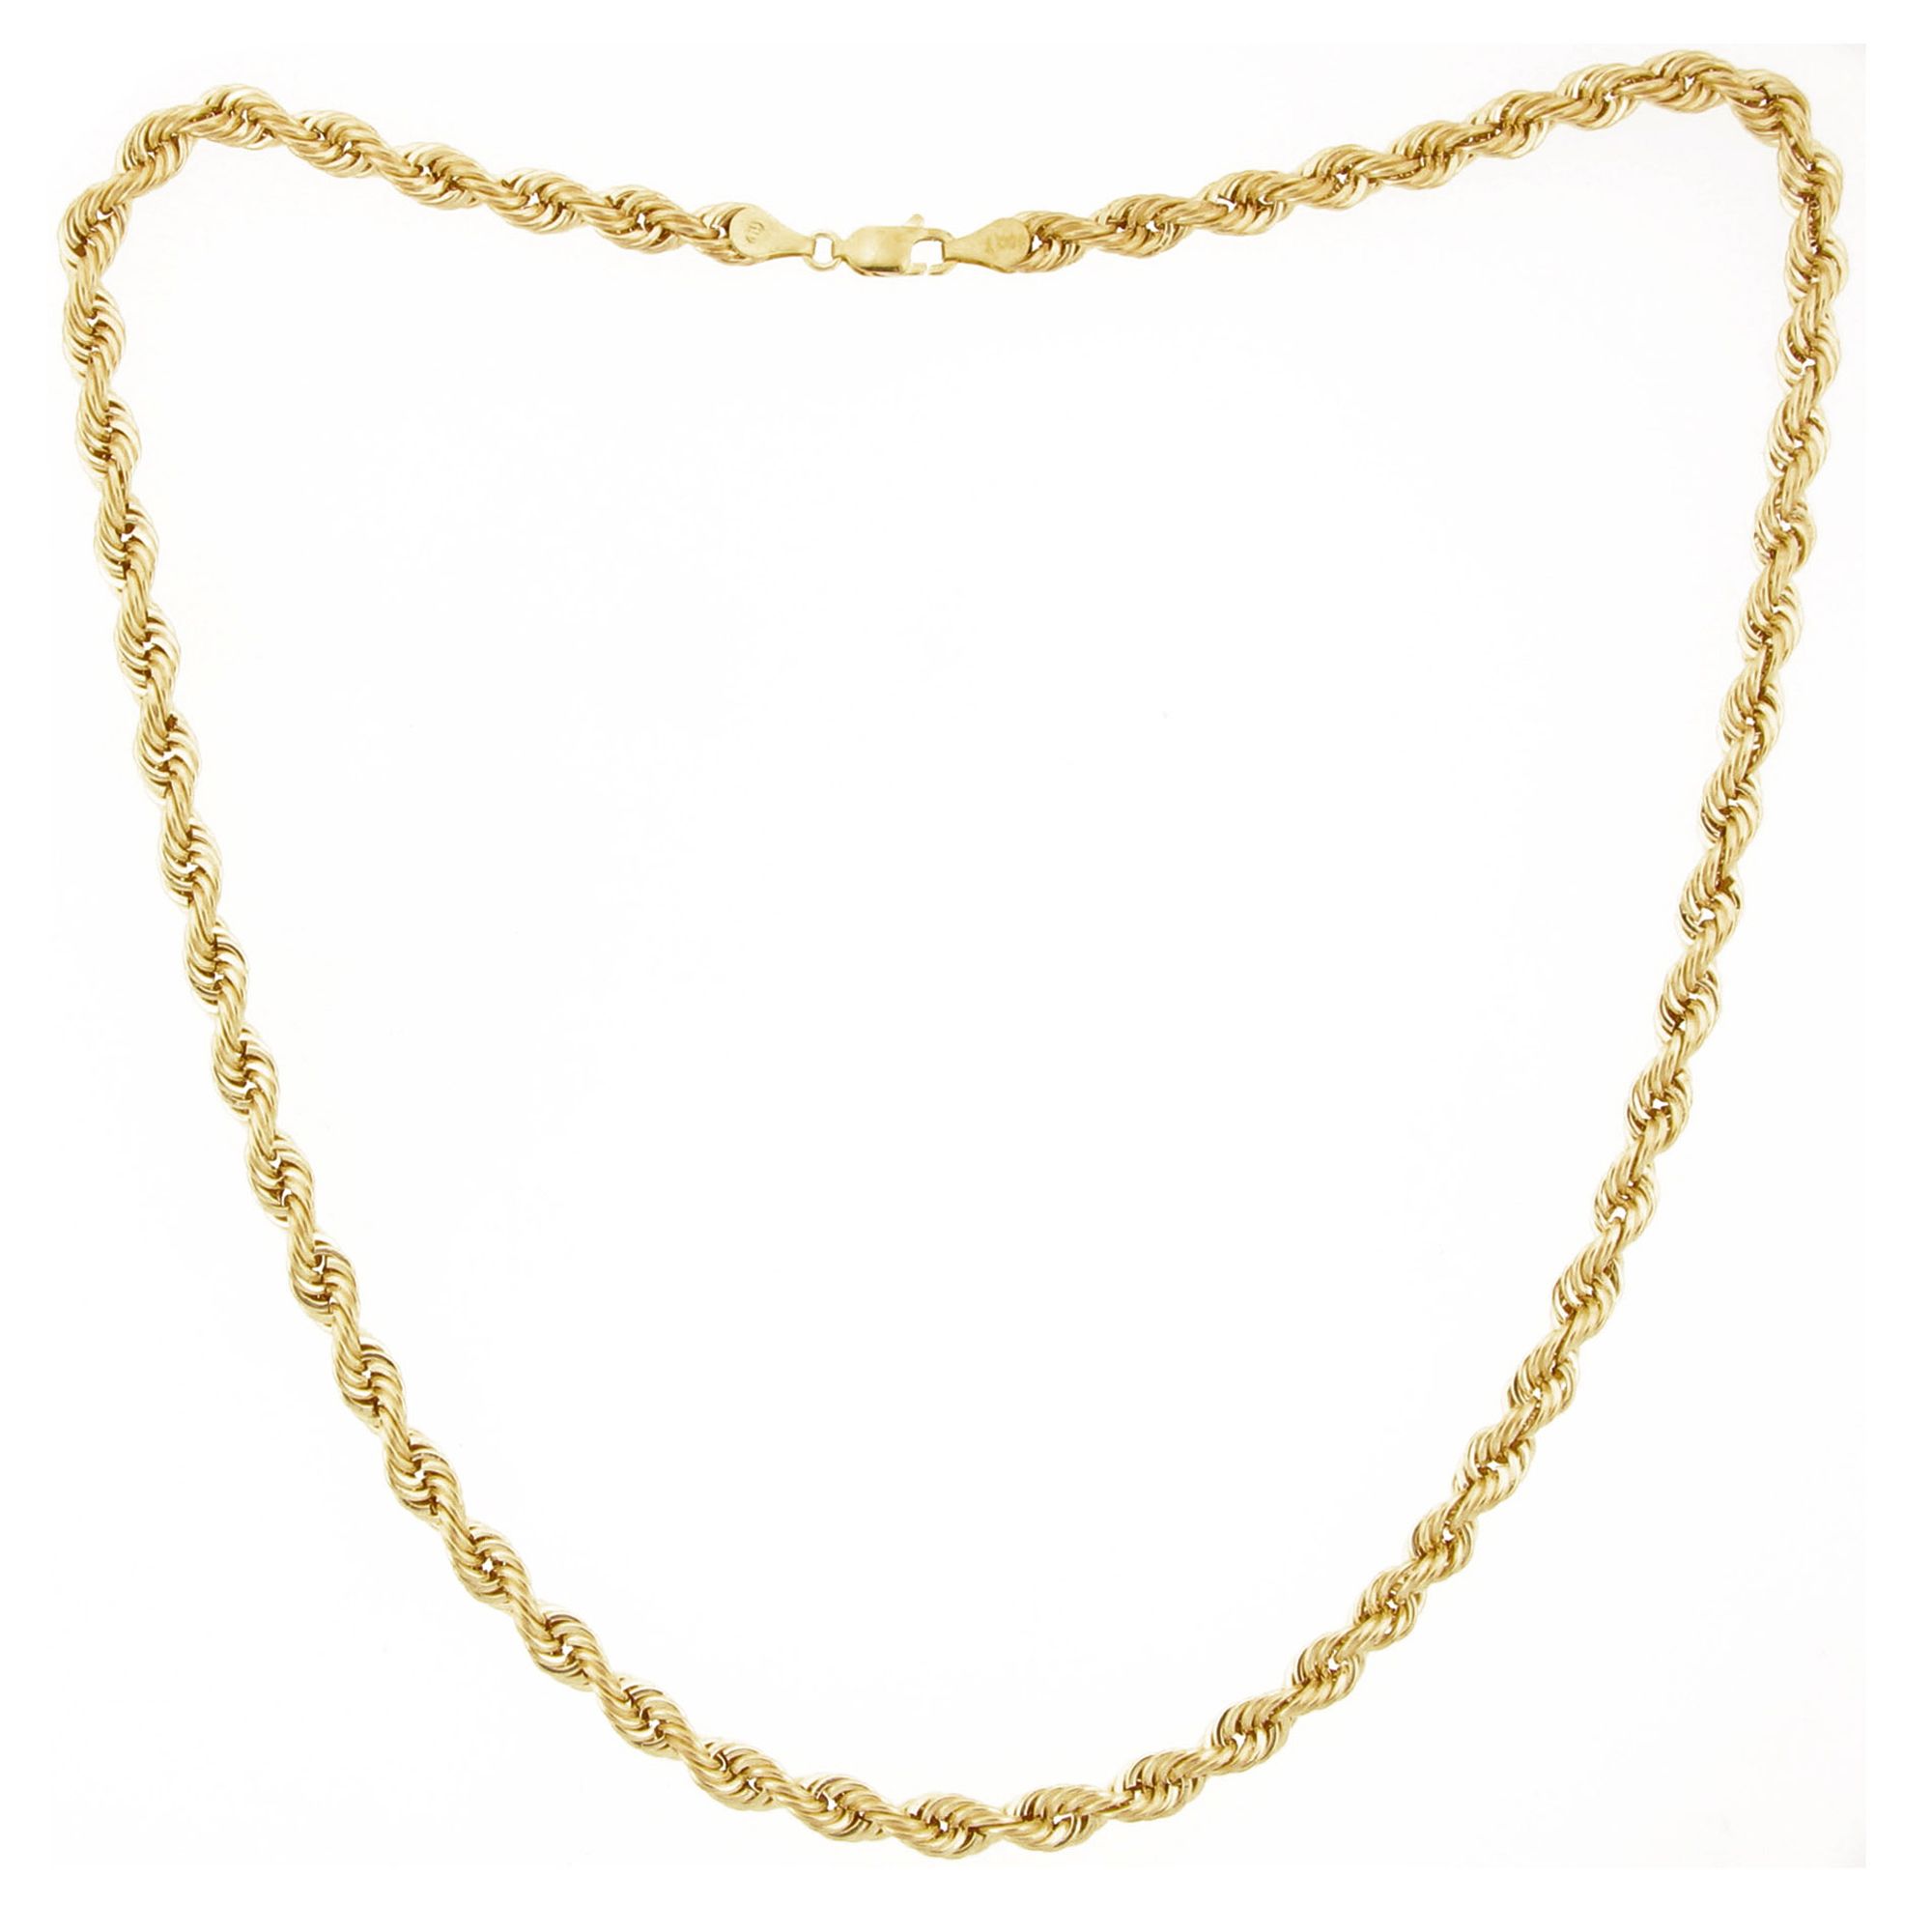 10K Yellow Gold 5mm 24 Inch Rope Necklace